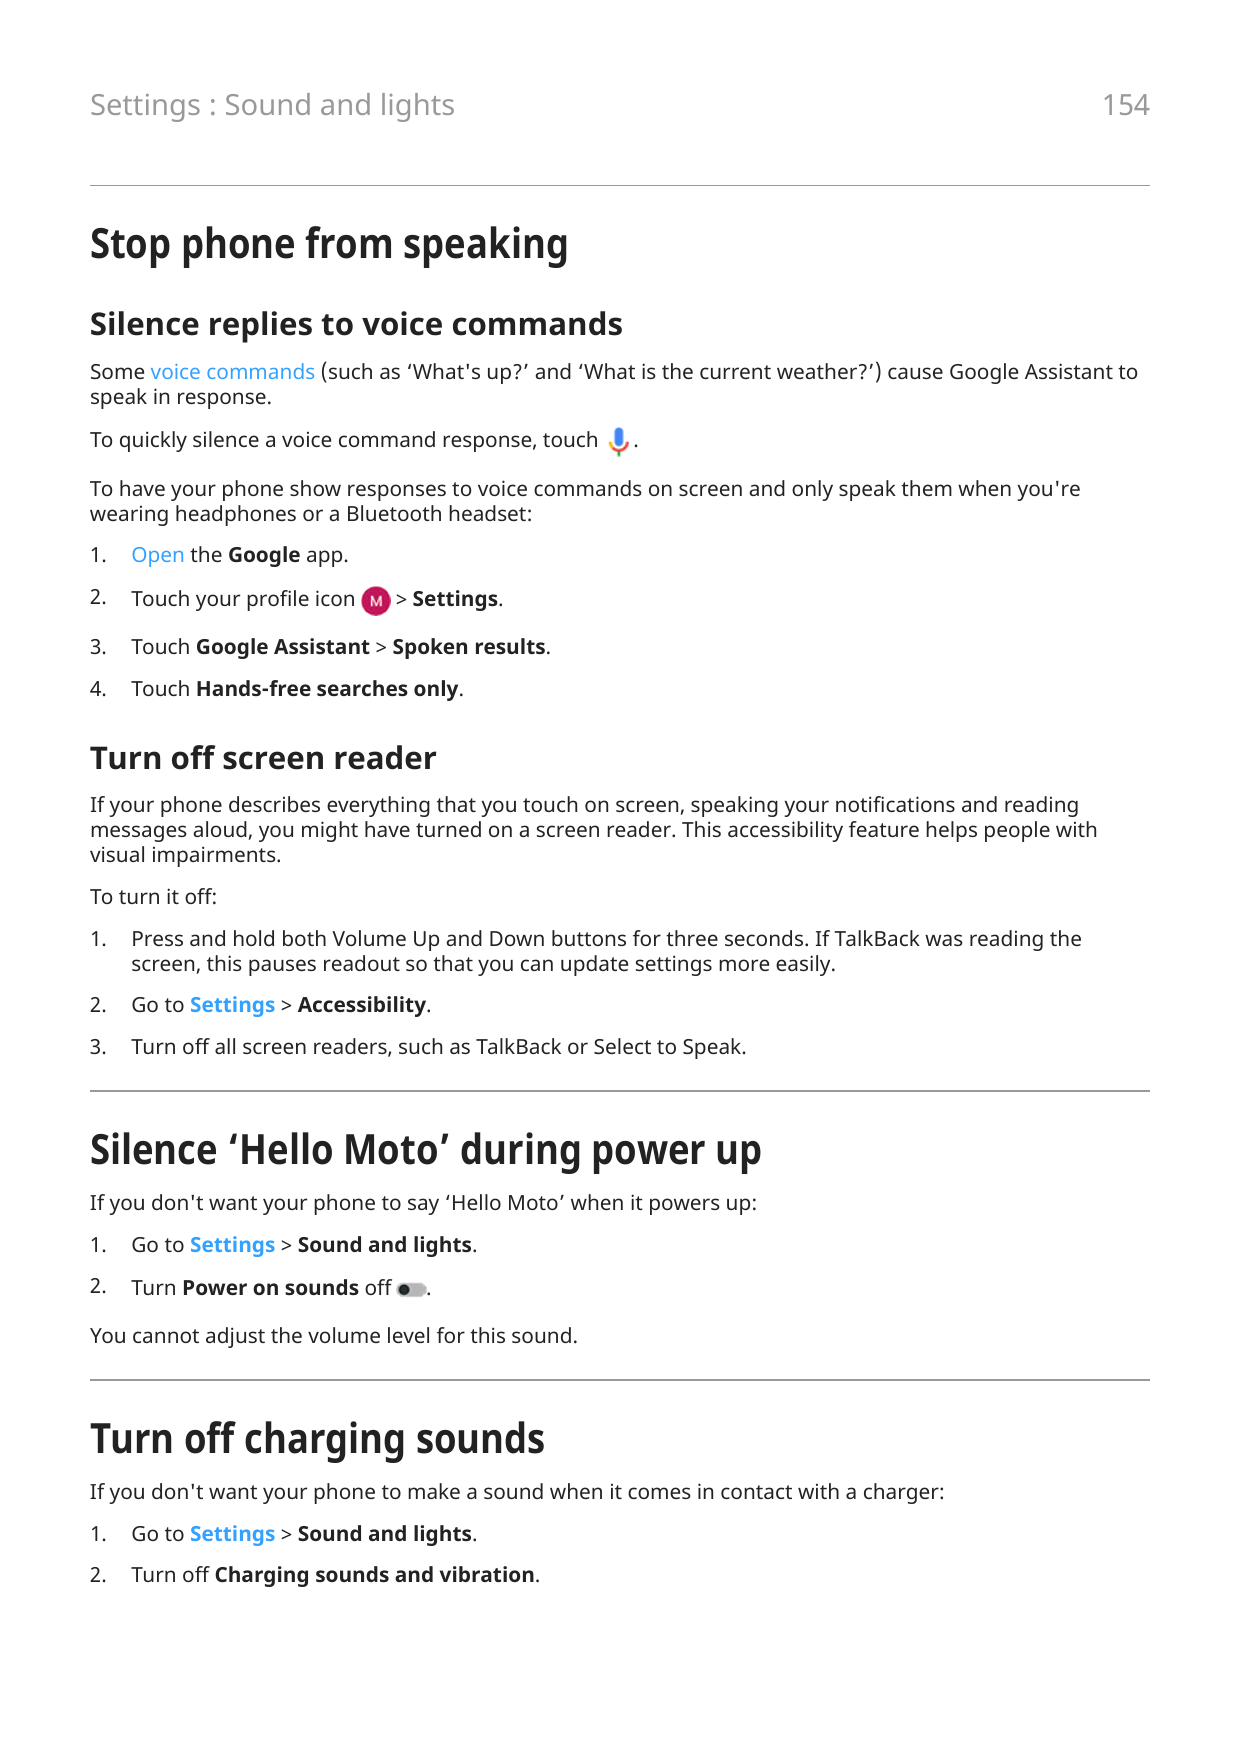 154Settings : Sound and lightsStop phone from speakingSilence replies to voice commandsSome voice commands (such as ‘What's up?’